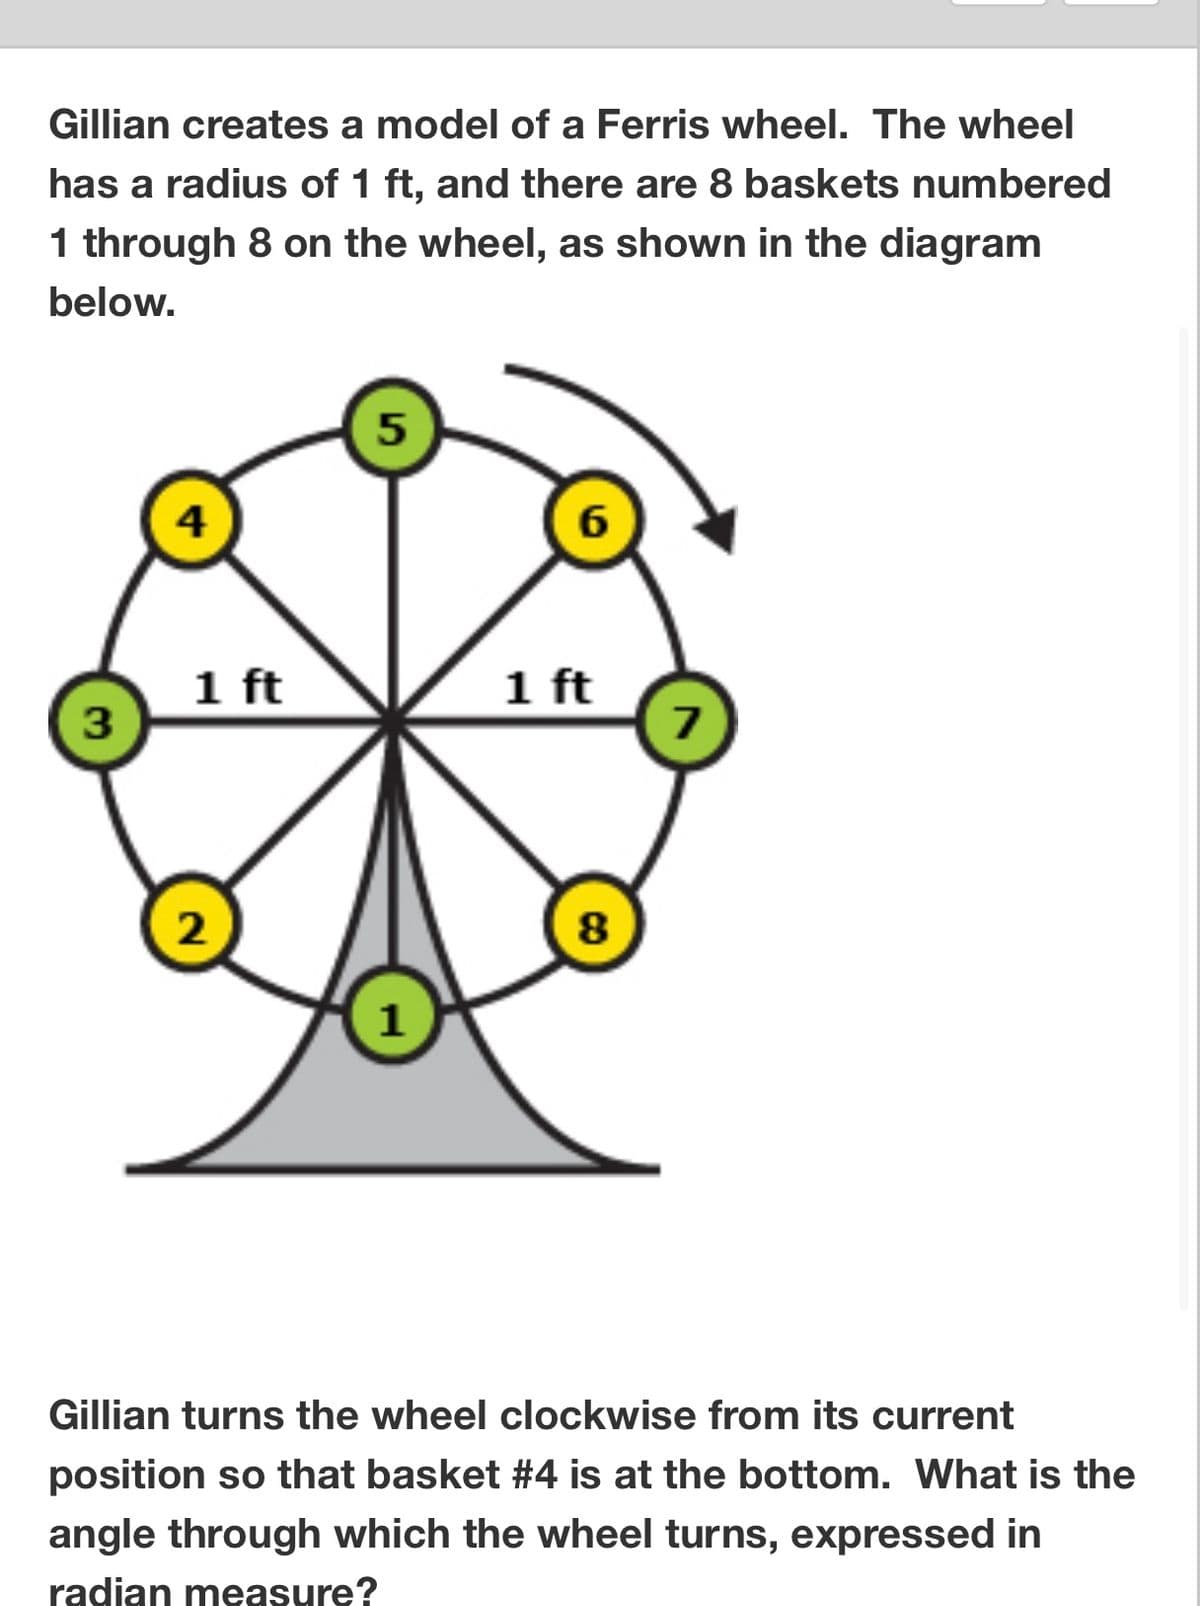 Gillian creates a model of a Ferris wheel. The wheel
has a radius of 1 ft, and there are 8 baskets numbered
1 through 8 on the wheel, as shown in the diagram
below.
3
4
1 ft
2
5
1
6
1 ft
8
7
Gillian turns the wheel clockwise from its current
position so that basket #4 is at the bottom. What is the
angle through which the wheel turns, expressed in
radian measure?